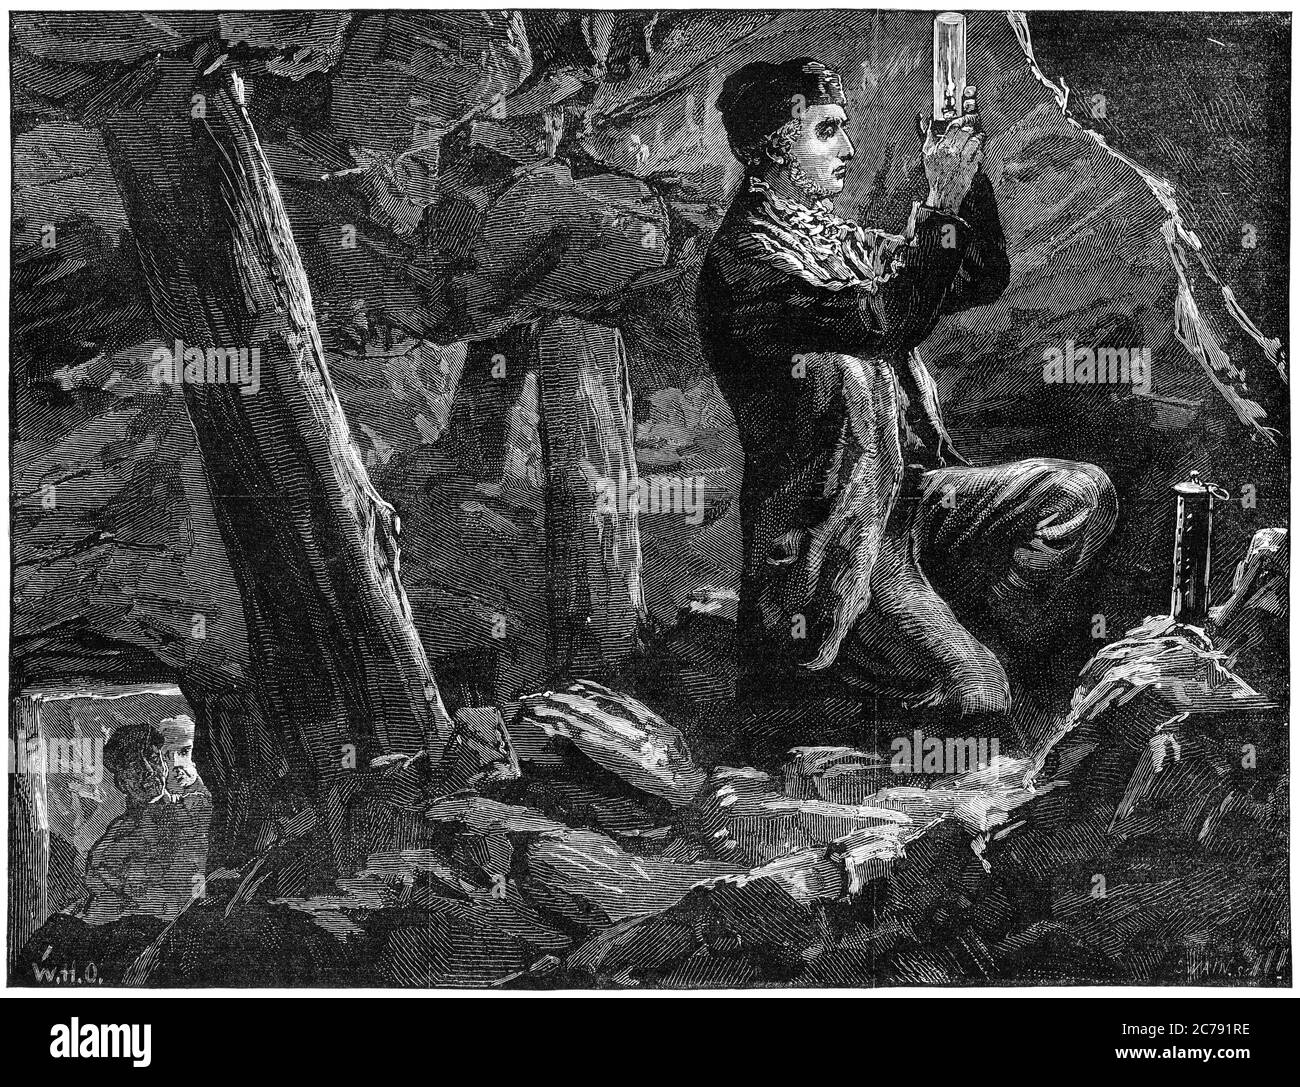 George Stephenson experimenting with the safety lamp in a mine, from Illustrated London News 1881 Stock Photo